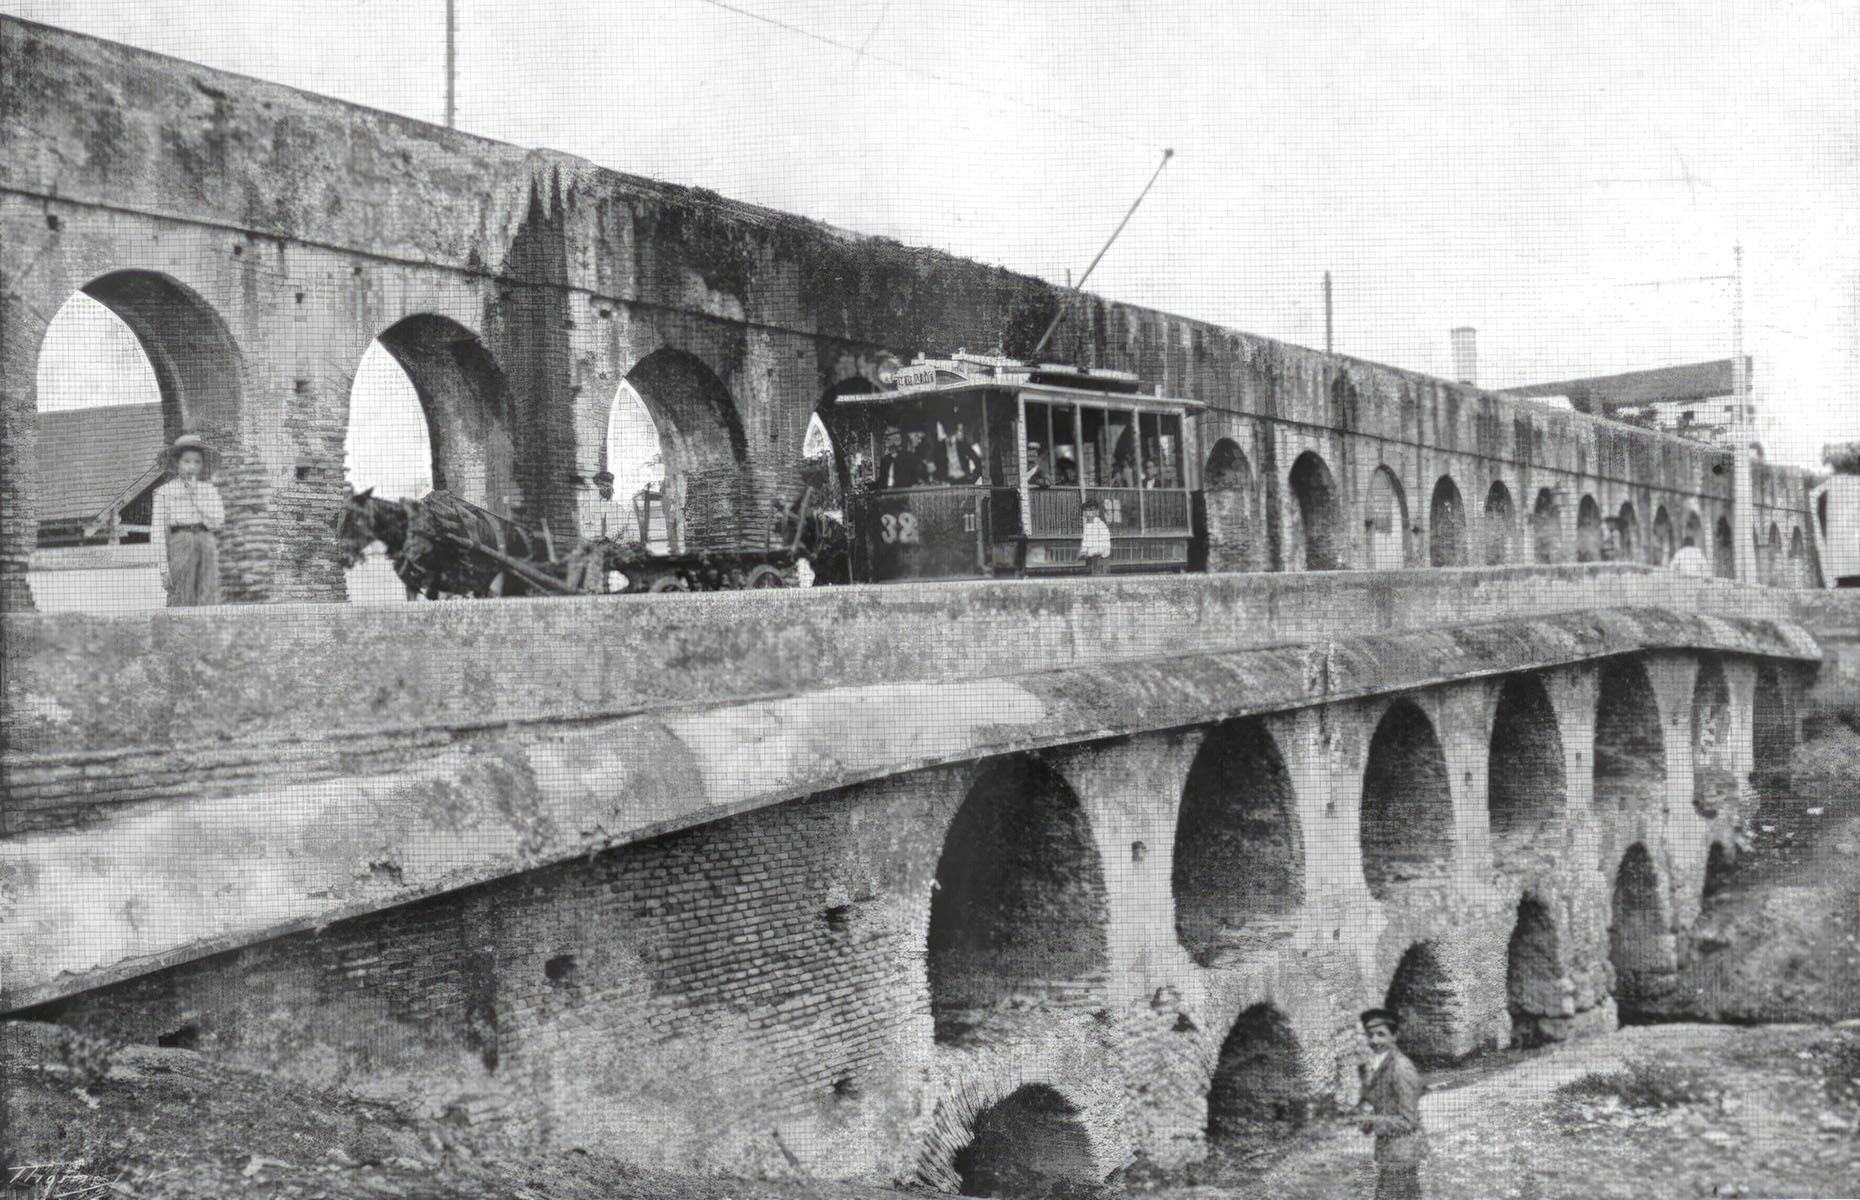 <p>The Canos de Carmona is a Roman aqueduct built during the first century BC to supply spring water to the ancient Roman city of Hispalis, or modern-day Seville. In its heyday it transported around 177,000 cubic feet of water and was still being used until 1912, well after this photo was taken. It was demolished after locals complained it was being used as a haven for criminals, and today only three small segments survive.</p>